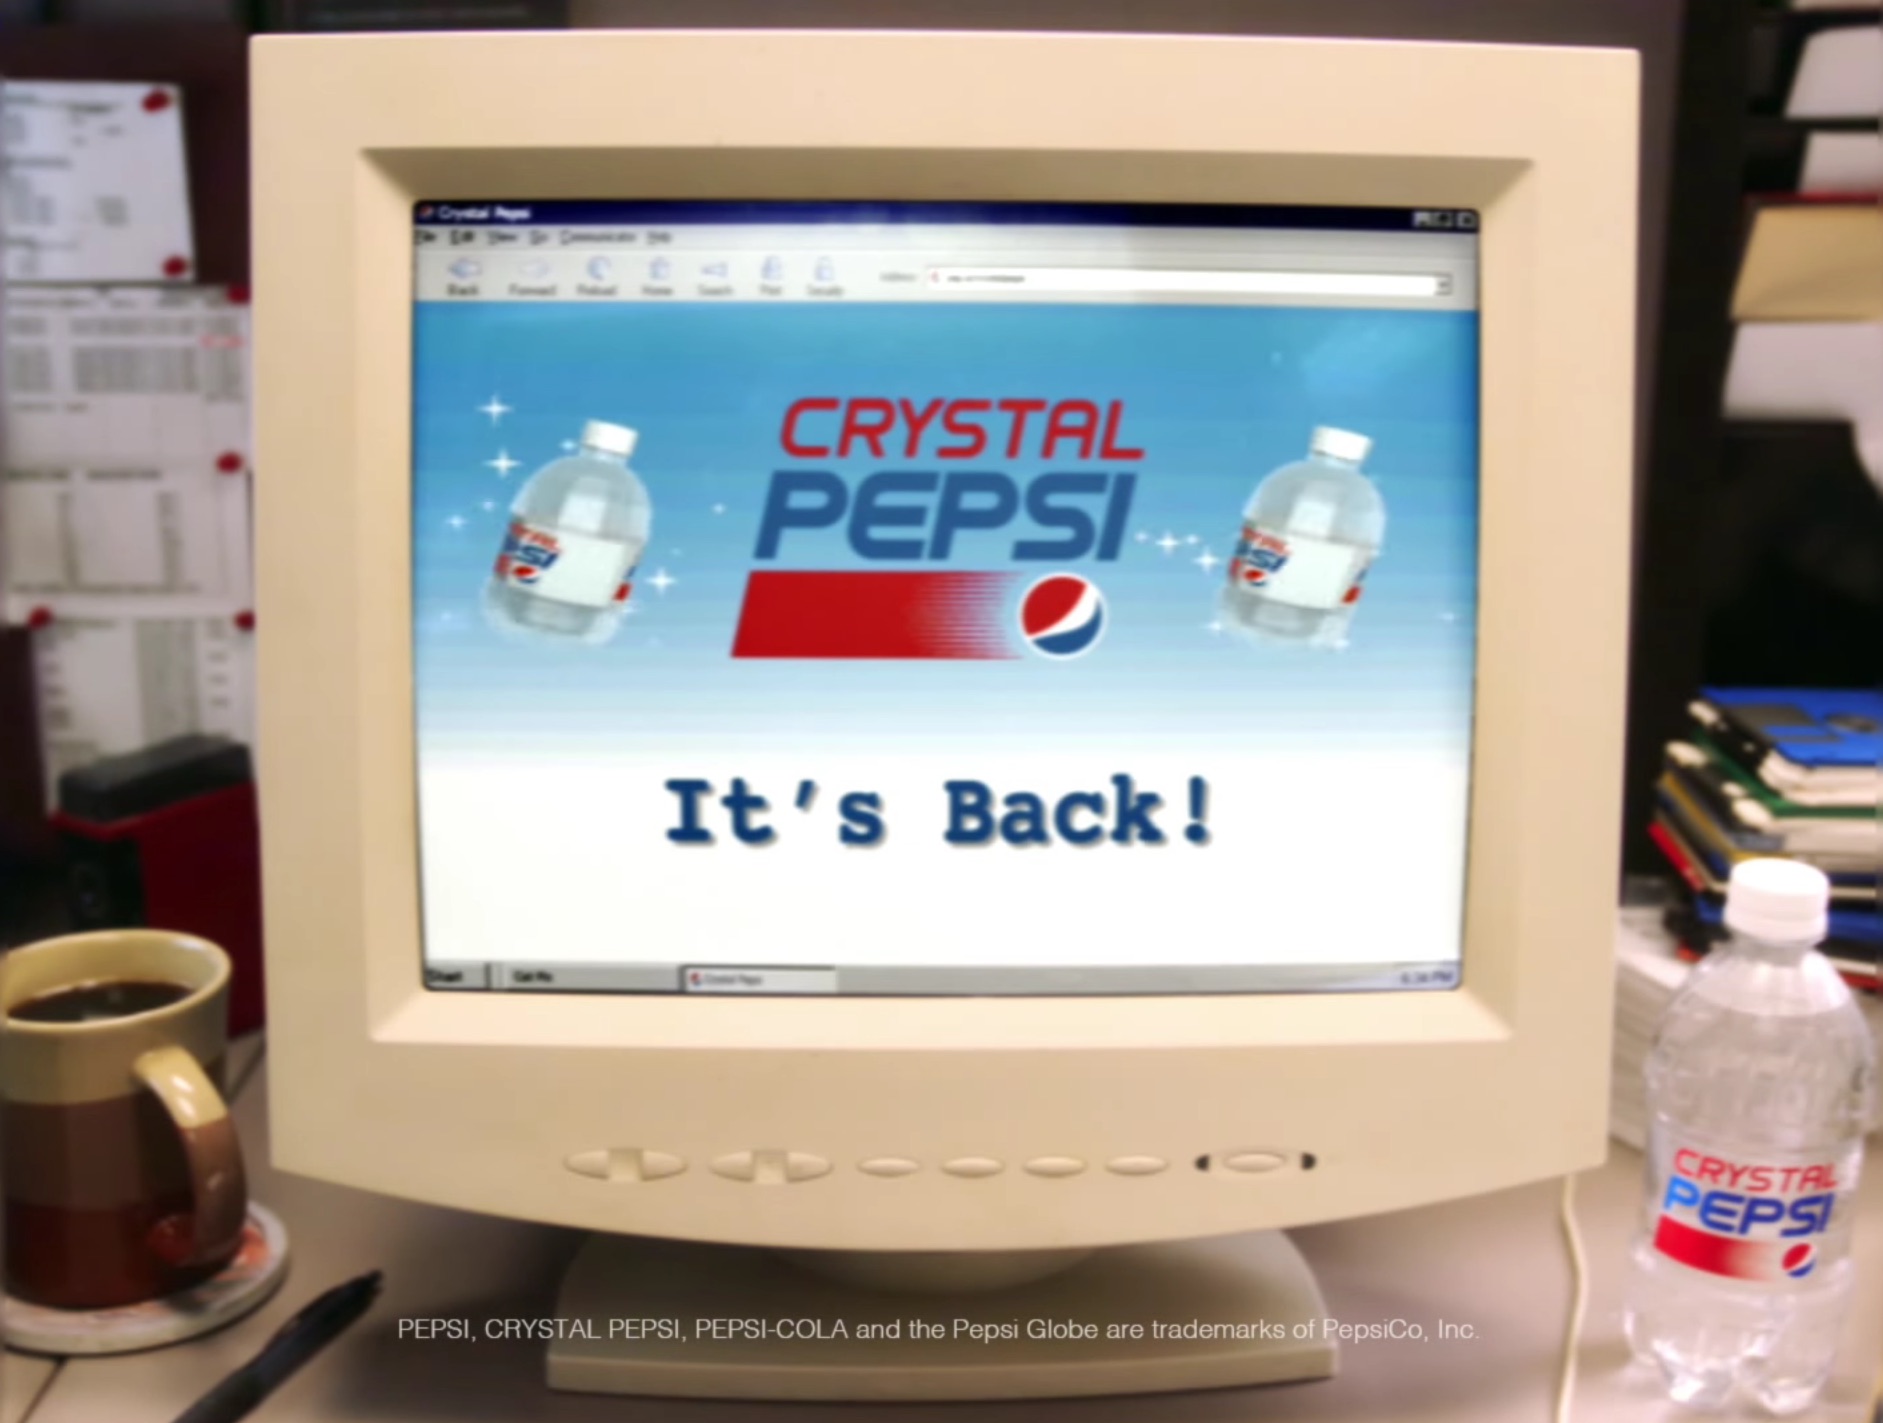 Return Of Crystal Pepsi Confirmed, But You Can’t Actually Buy It (Yet)